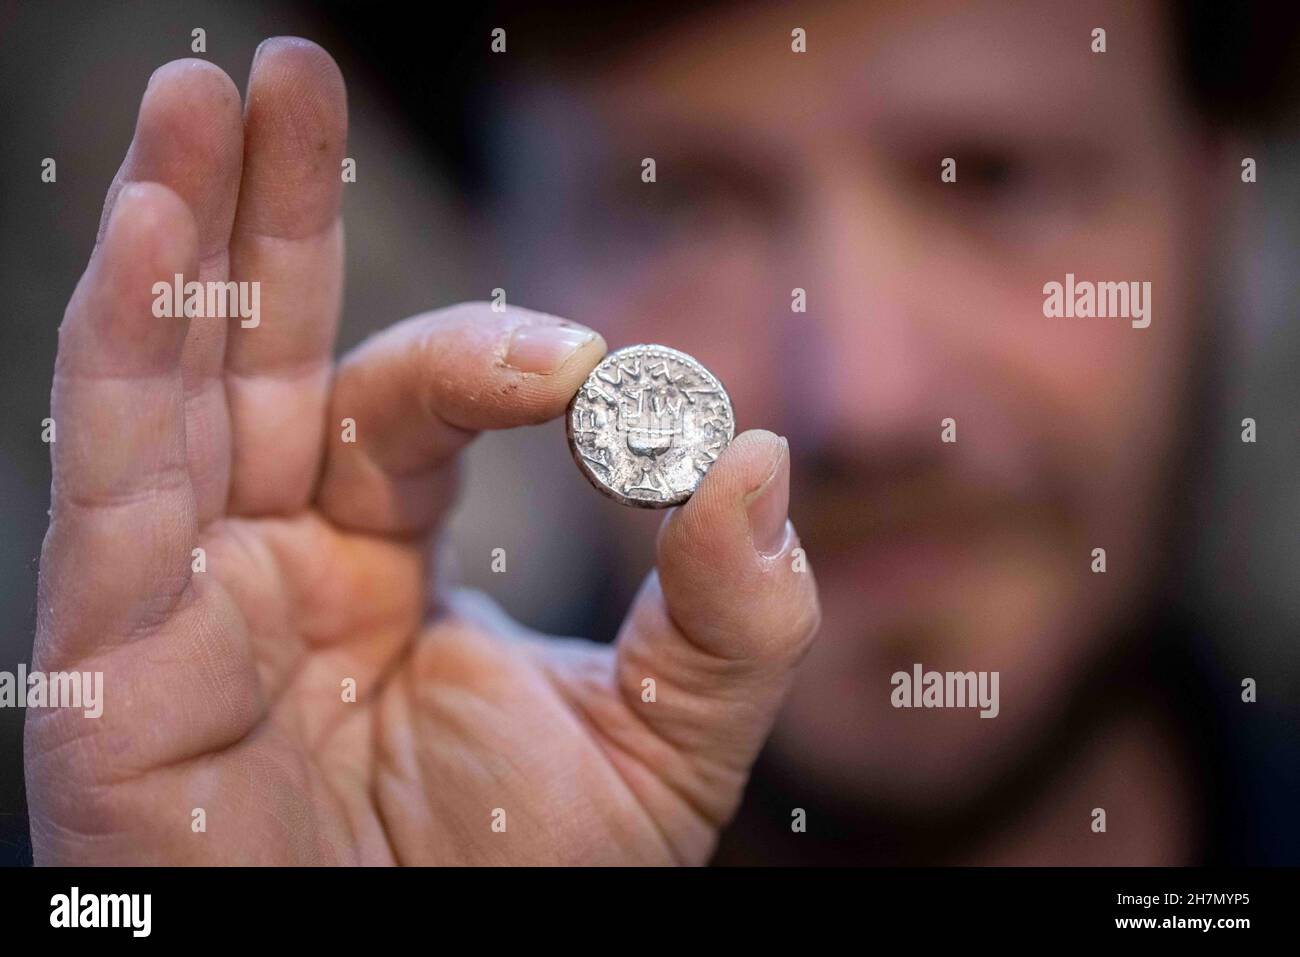 (211124) -- JERUSALEM, Nov. 24, 2021 (Xinhua) -- An archaeologist shows the ancient silver coin dating back to about 2,000 years ago in Jerusalem, Nov. 23, 2021. An ancient shekel, dating back to about 2,000 years ago, was discovered in Jerusalem, the Israel Antiquities Authority (IAA) said on Tuesday. The shekel, which weighs about 14 grams, was probably minted by one priest of the Jewish Second Temple, shortly before the destruction of the temple. (JINI via Xinhua) Stock Photo